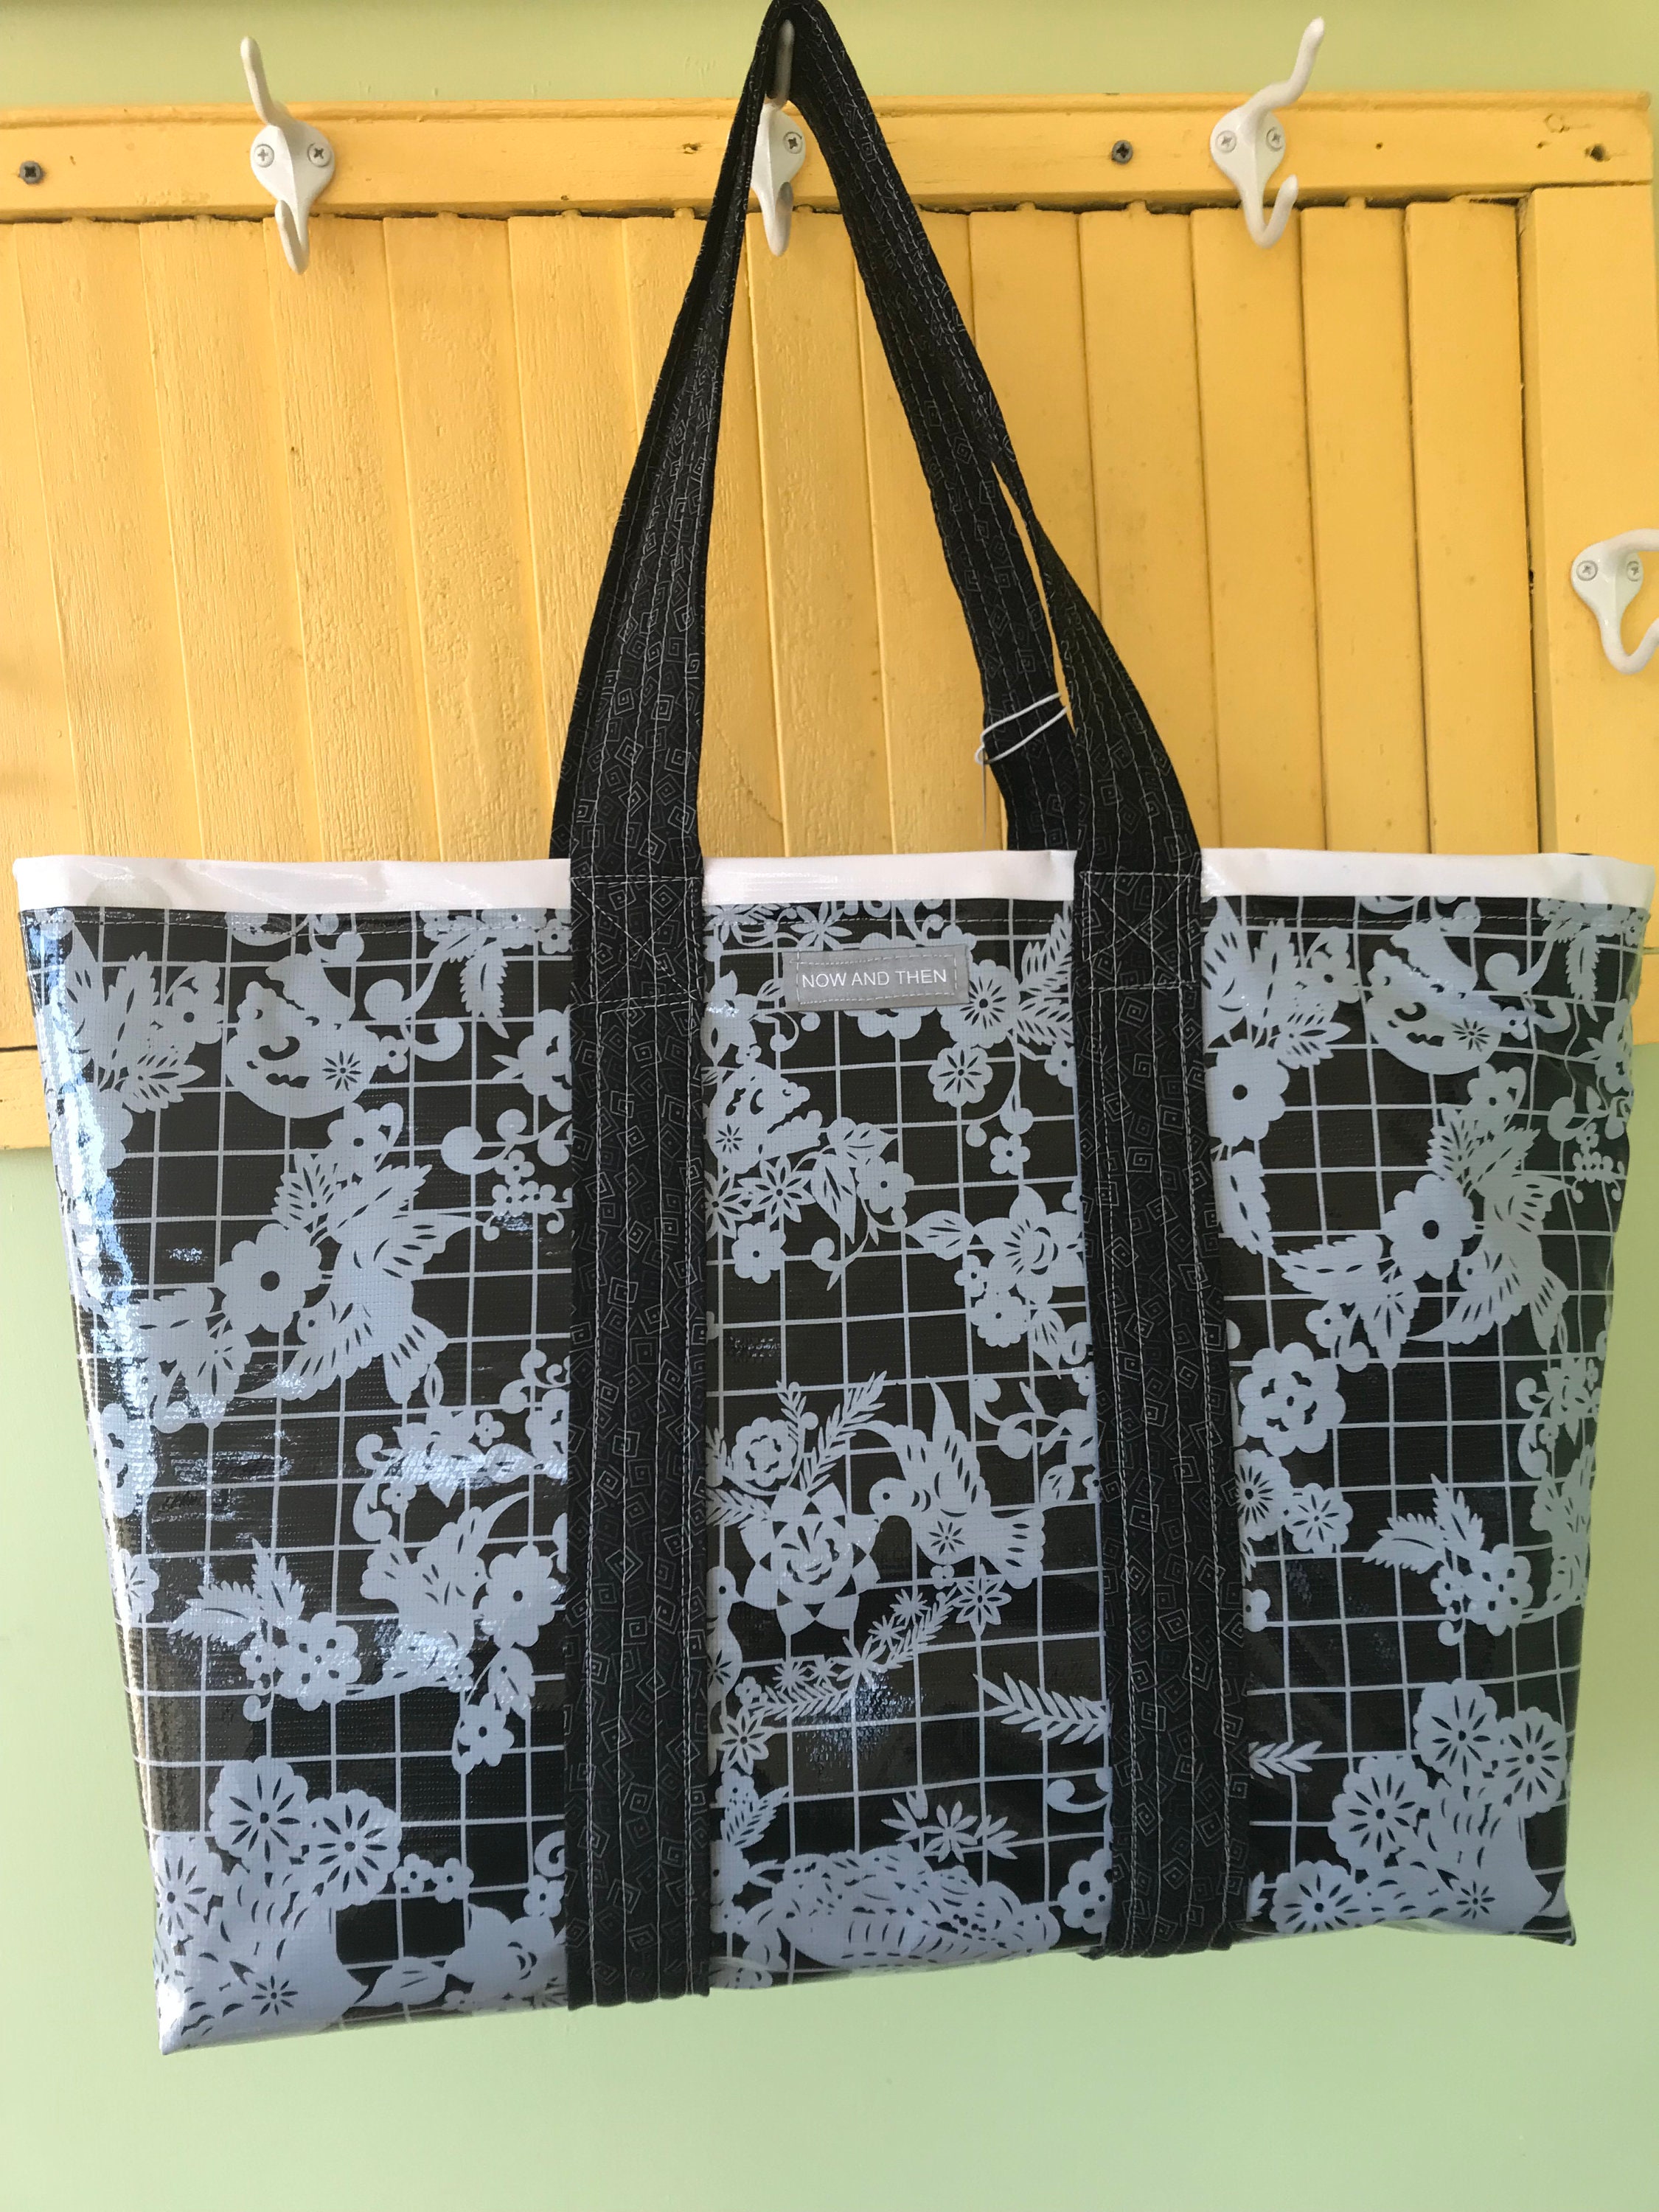 Day of the Deadblack and Gray Oilcloth Tote Bag | Etsy